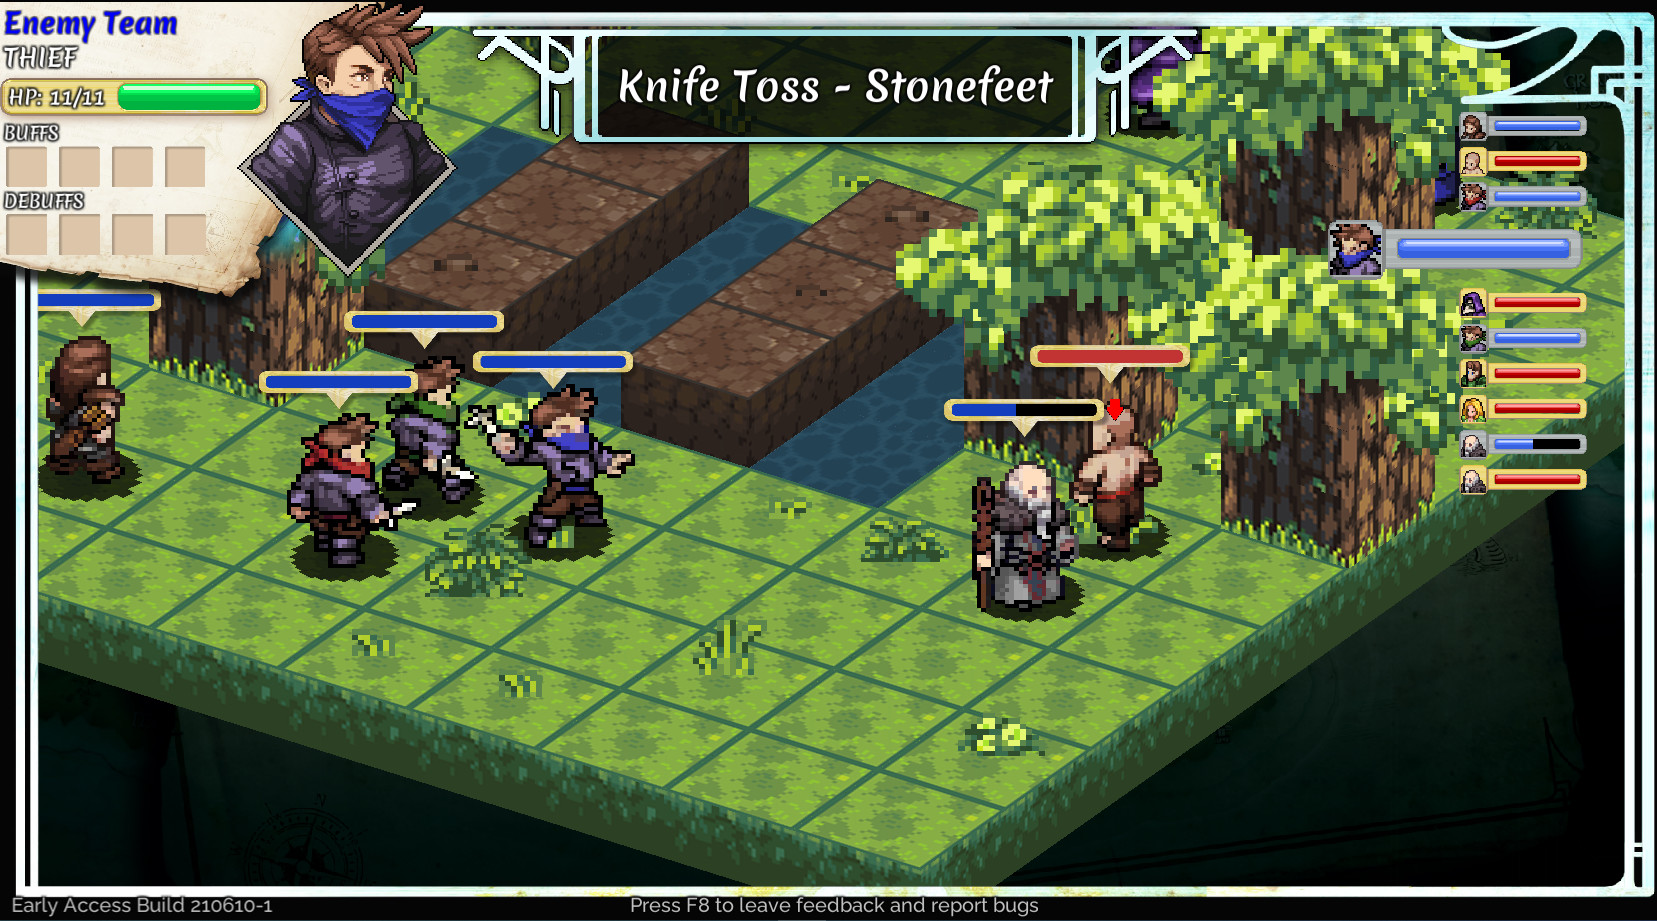 Live by the Sword: Tactics Impression – RPGamer